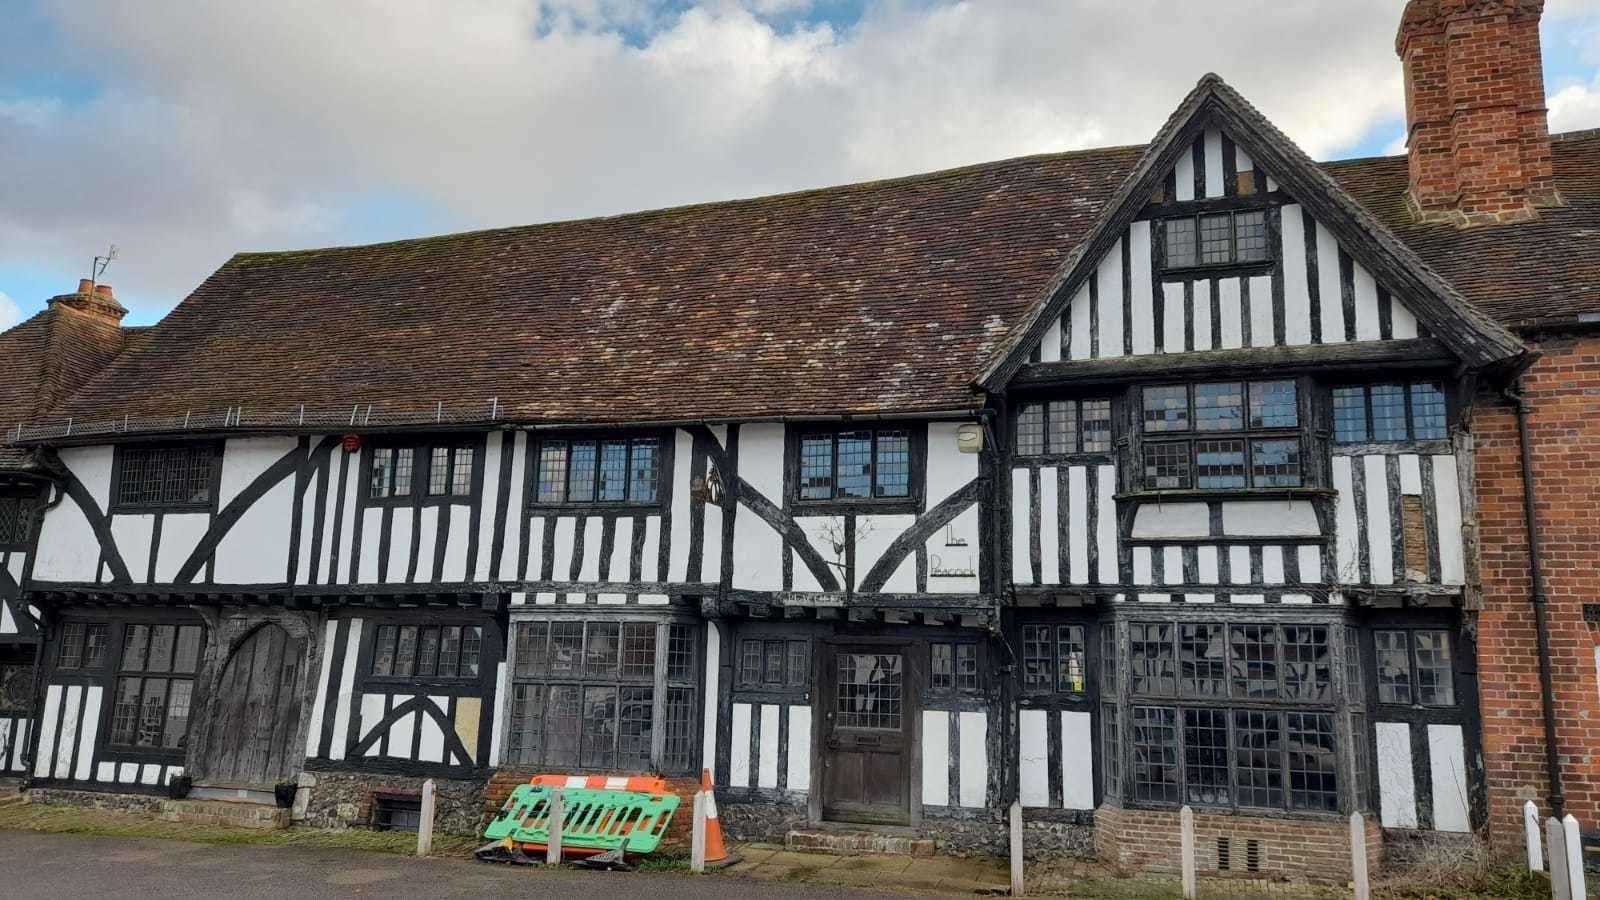 The wine bar is planned to be housed in an old property in the village square